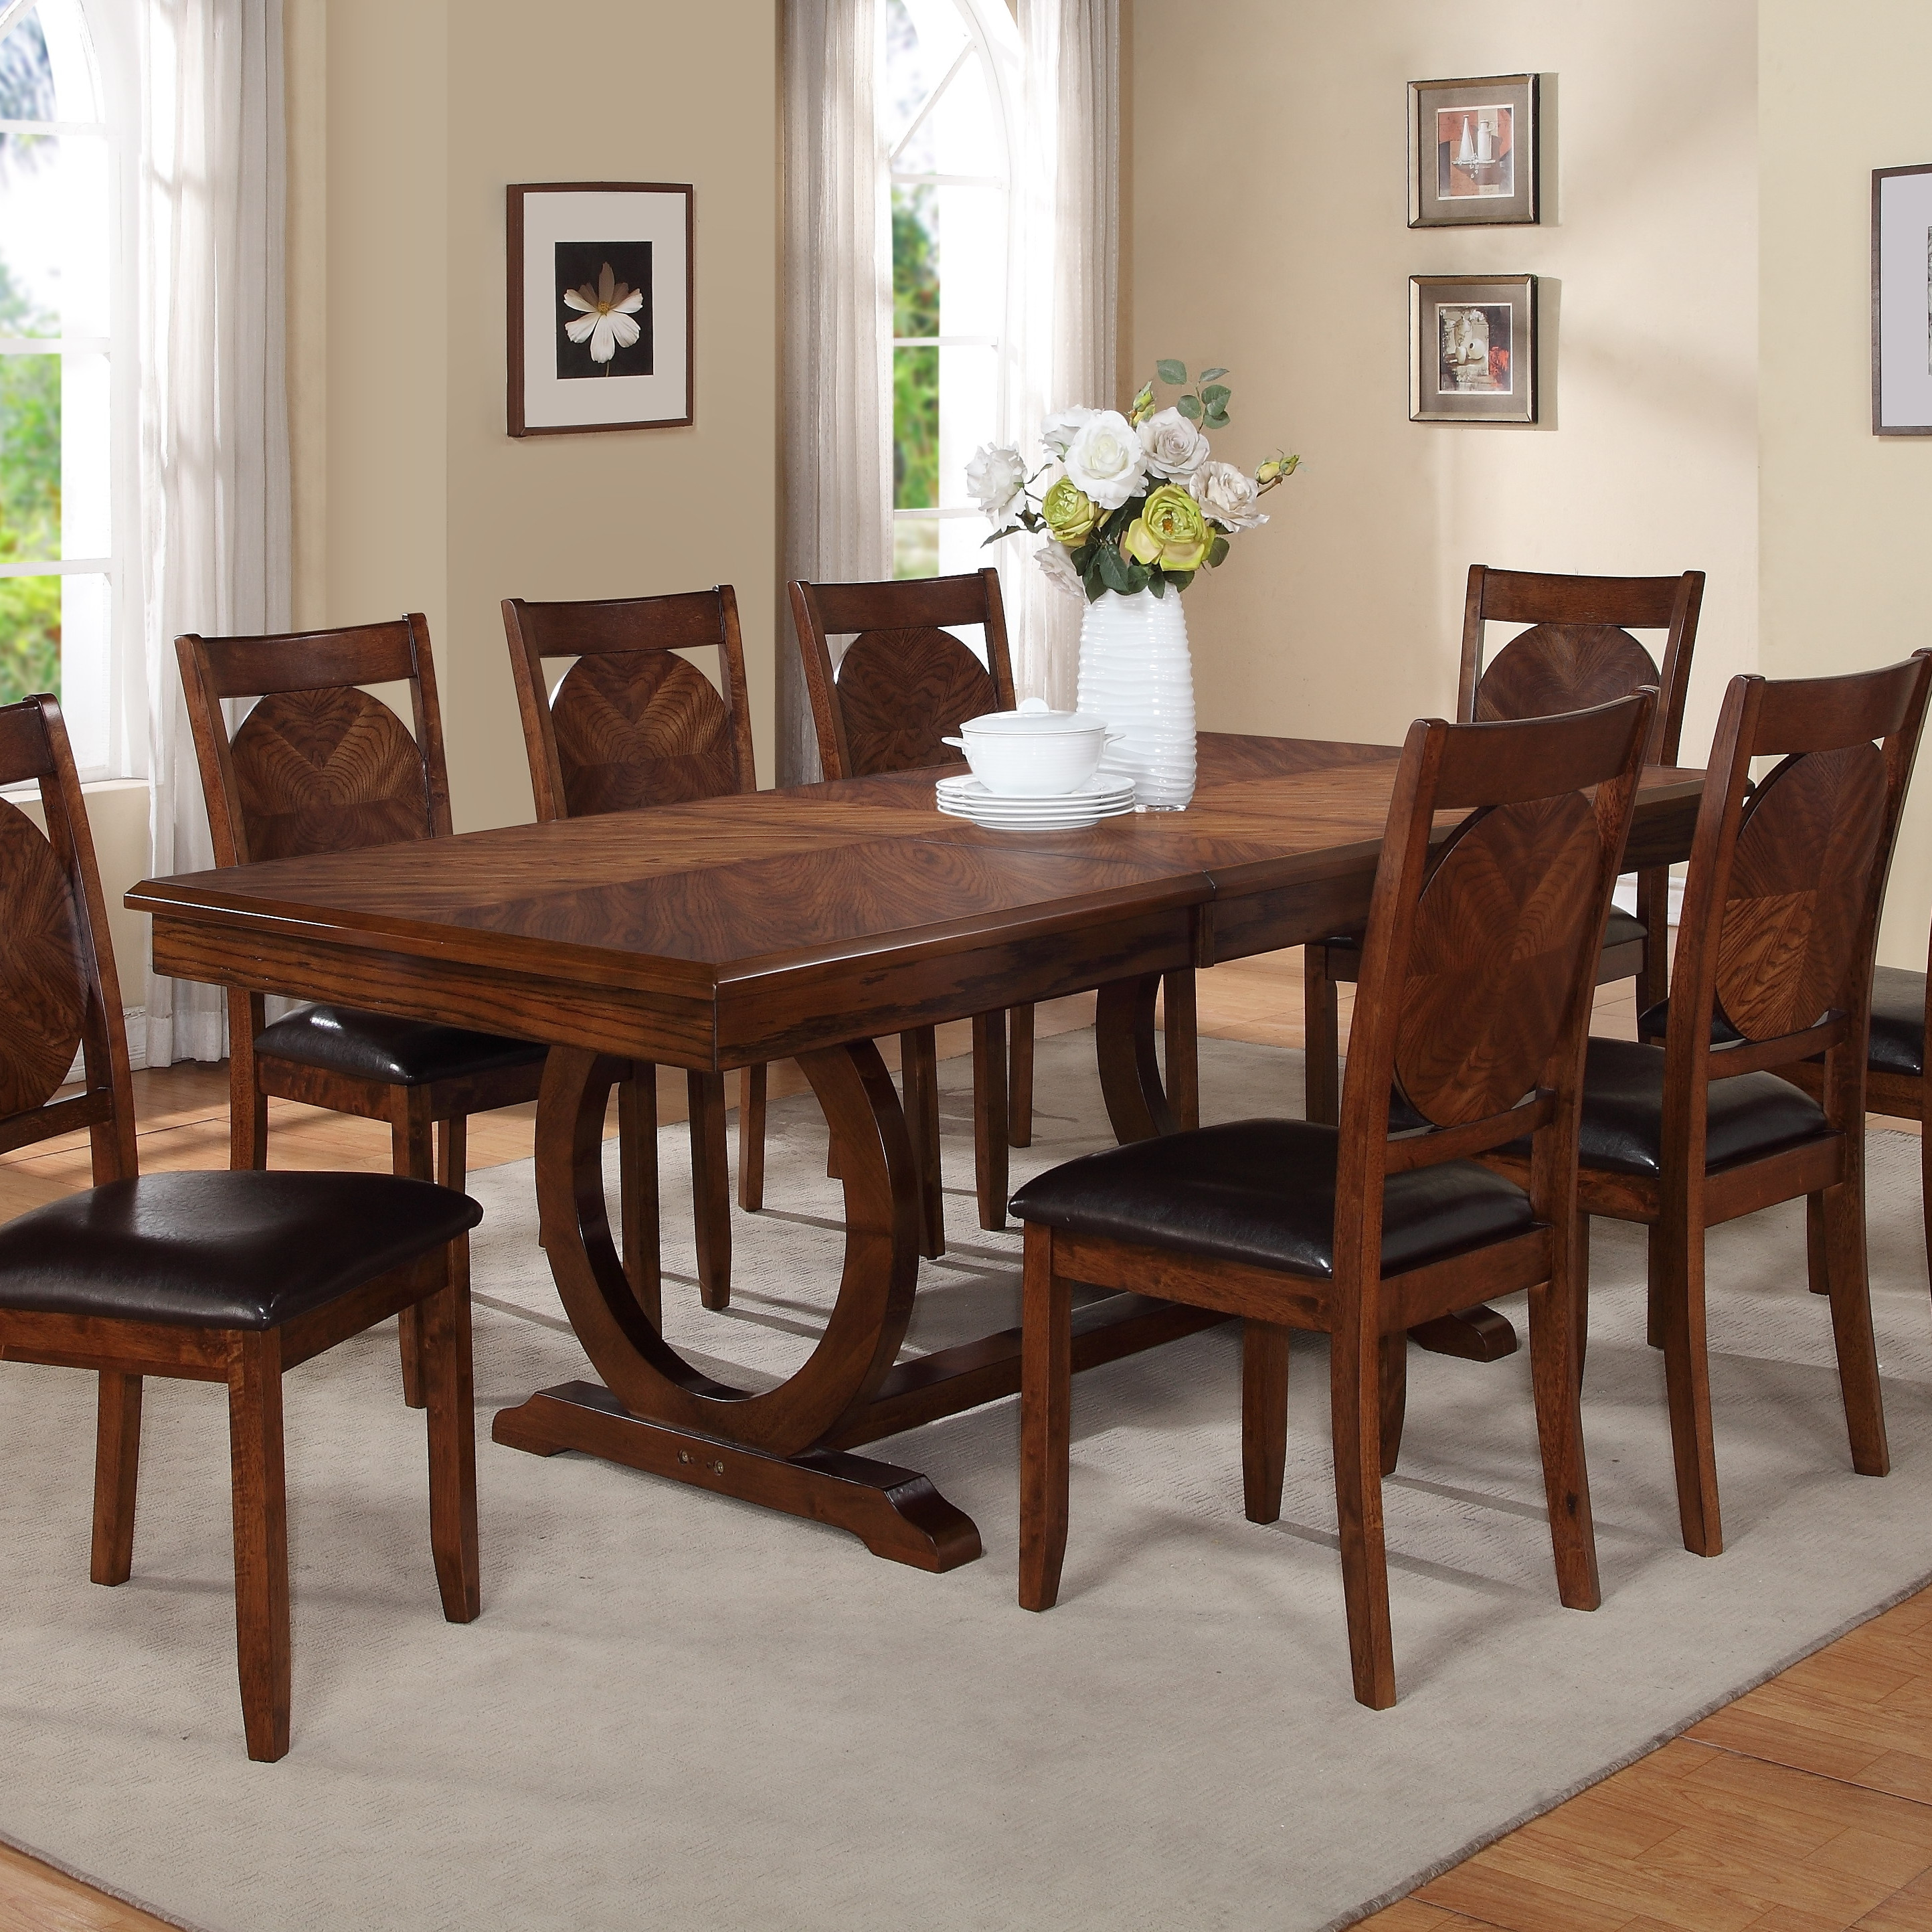 dining tables images photo - 10